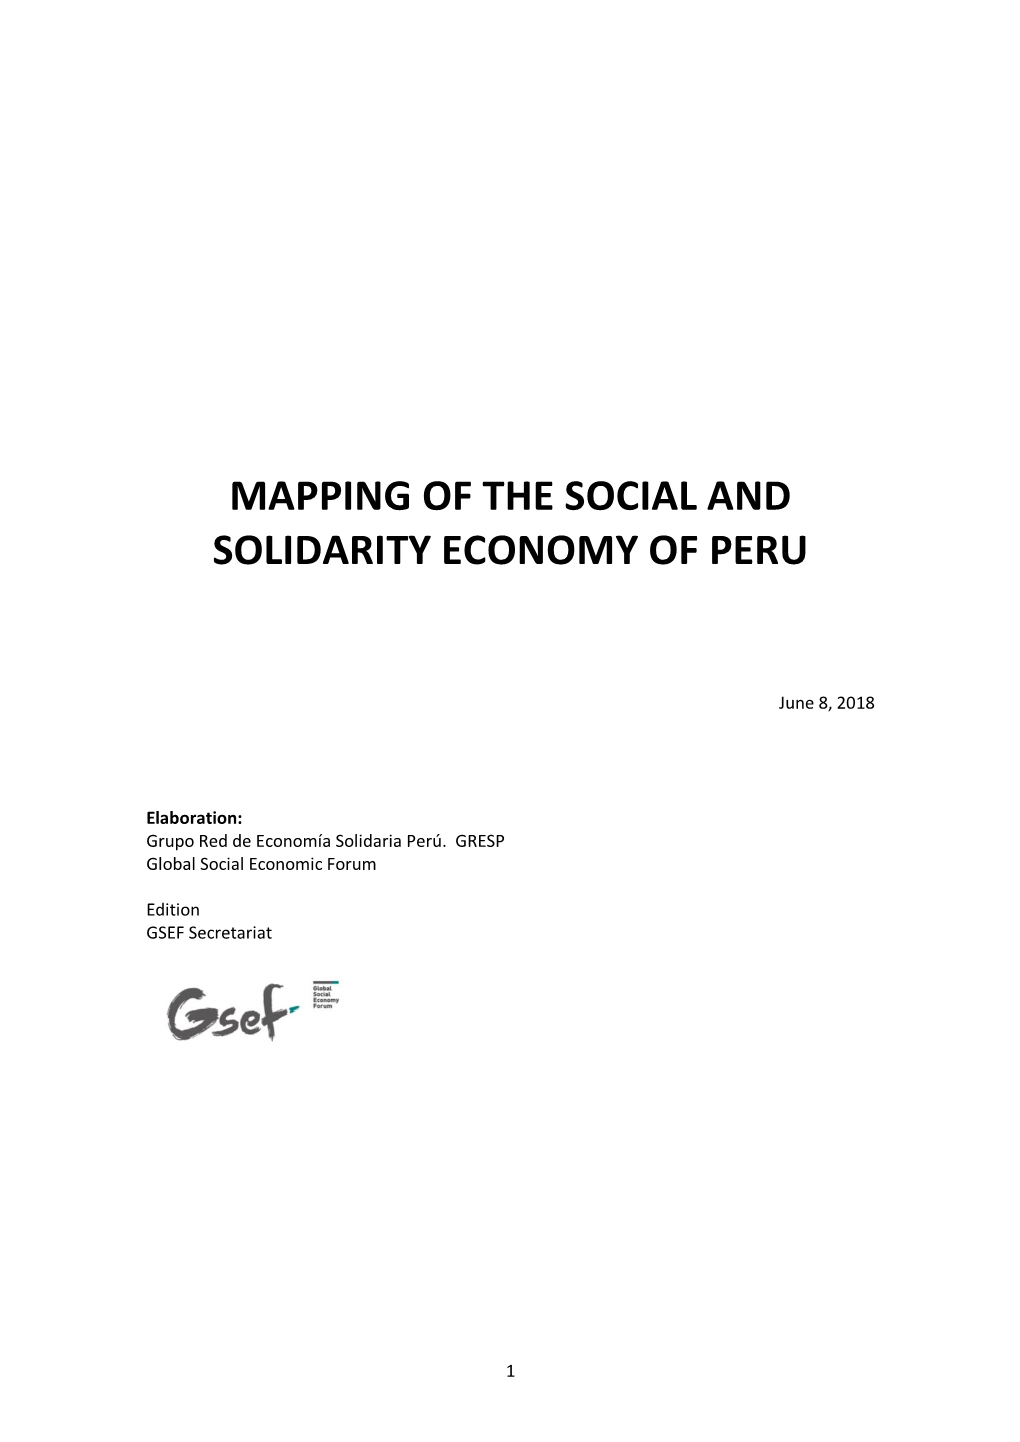 Mapping of the Social and Solidarity Economy of Peru